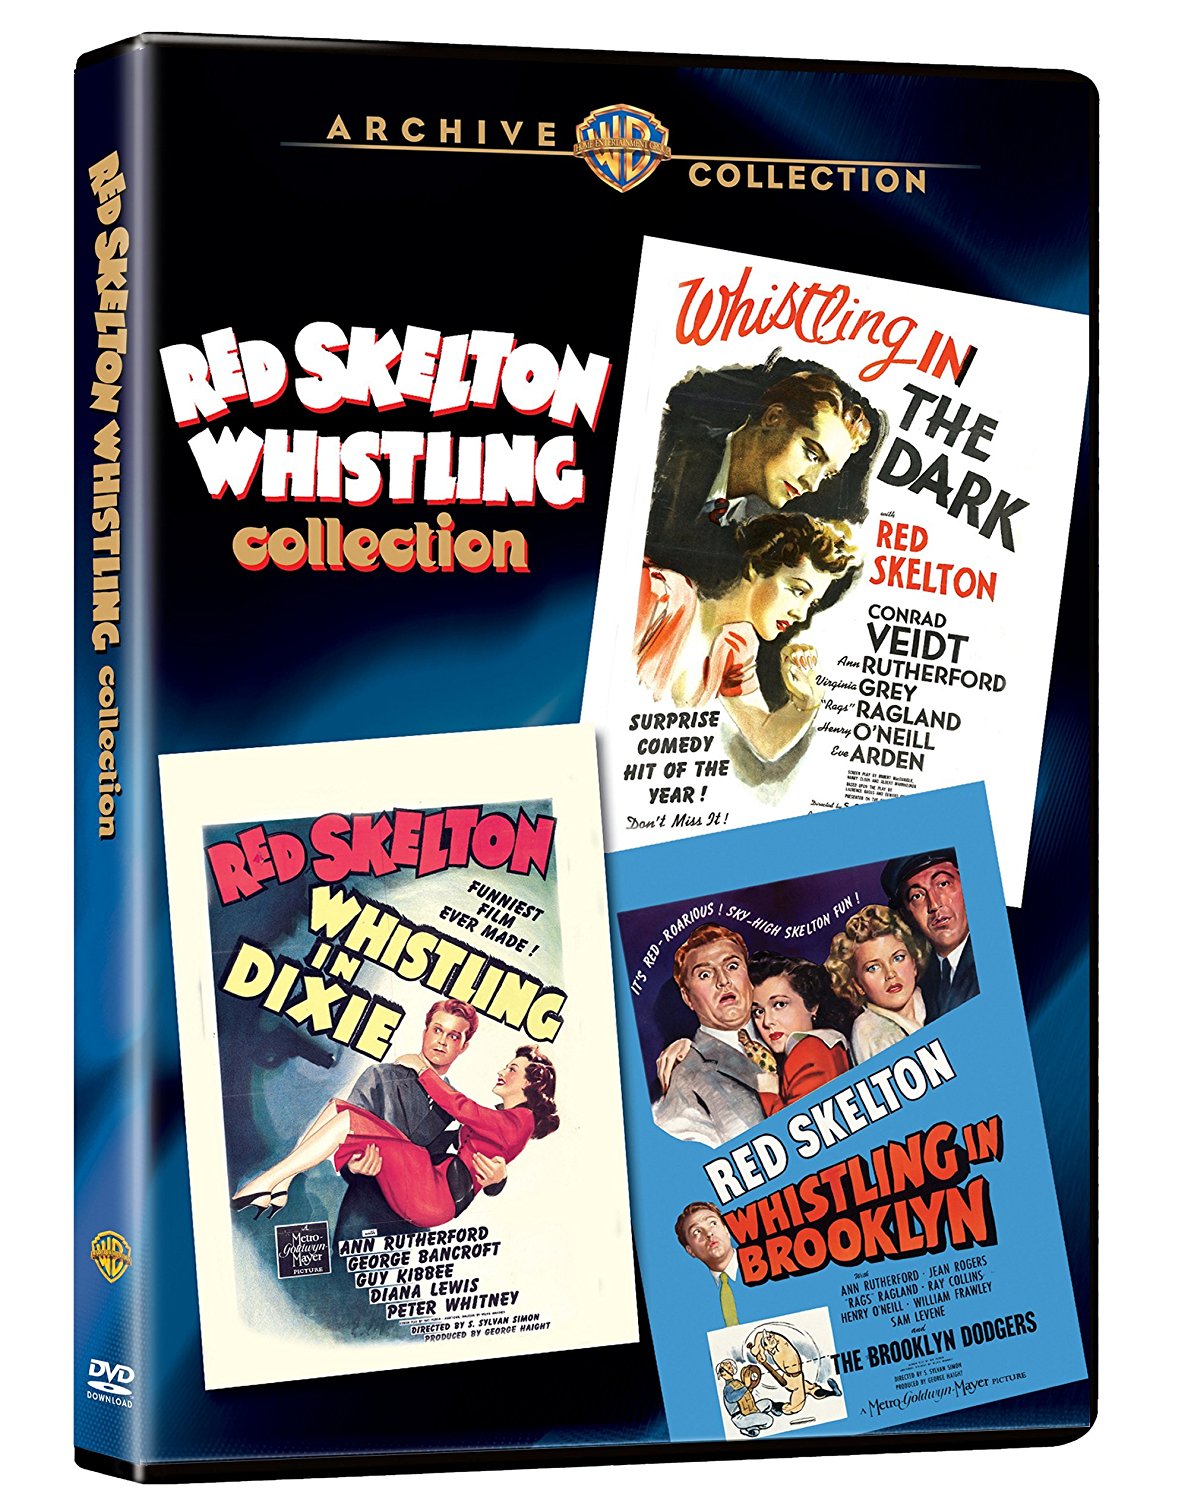 Red Skelton Whistling Collection (Whistling in the Dark, Whistling in Dixie, Whistling in Brooklyn)